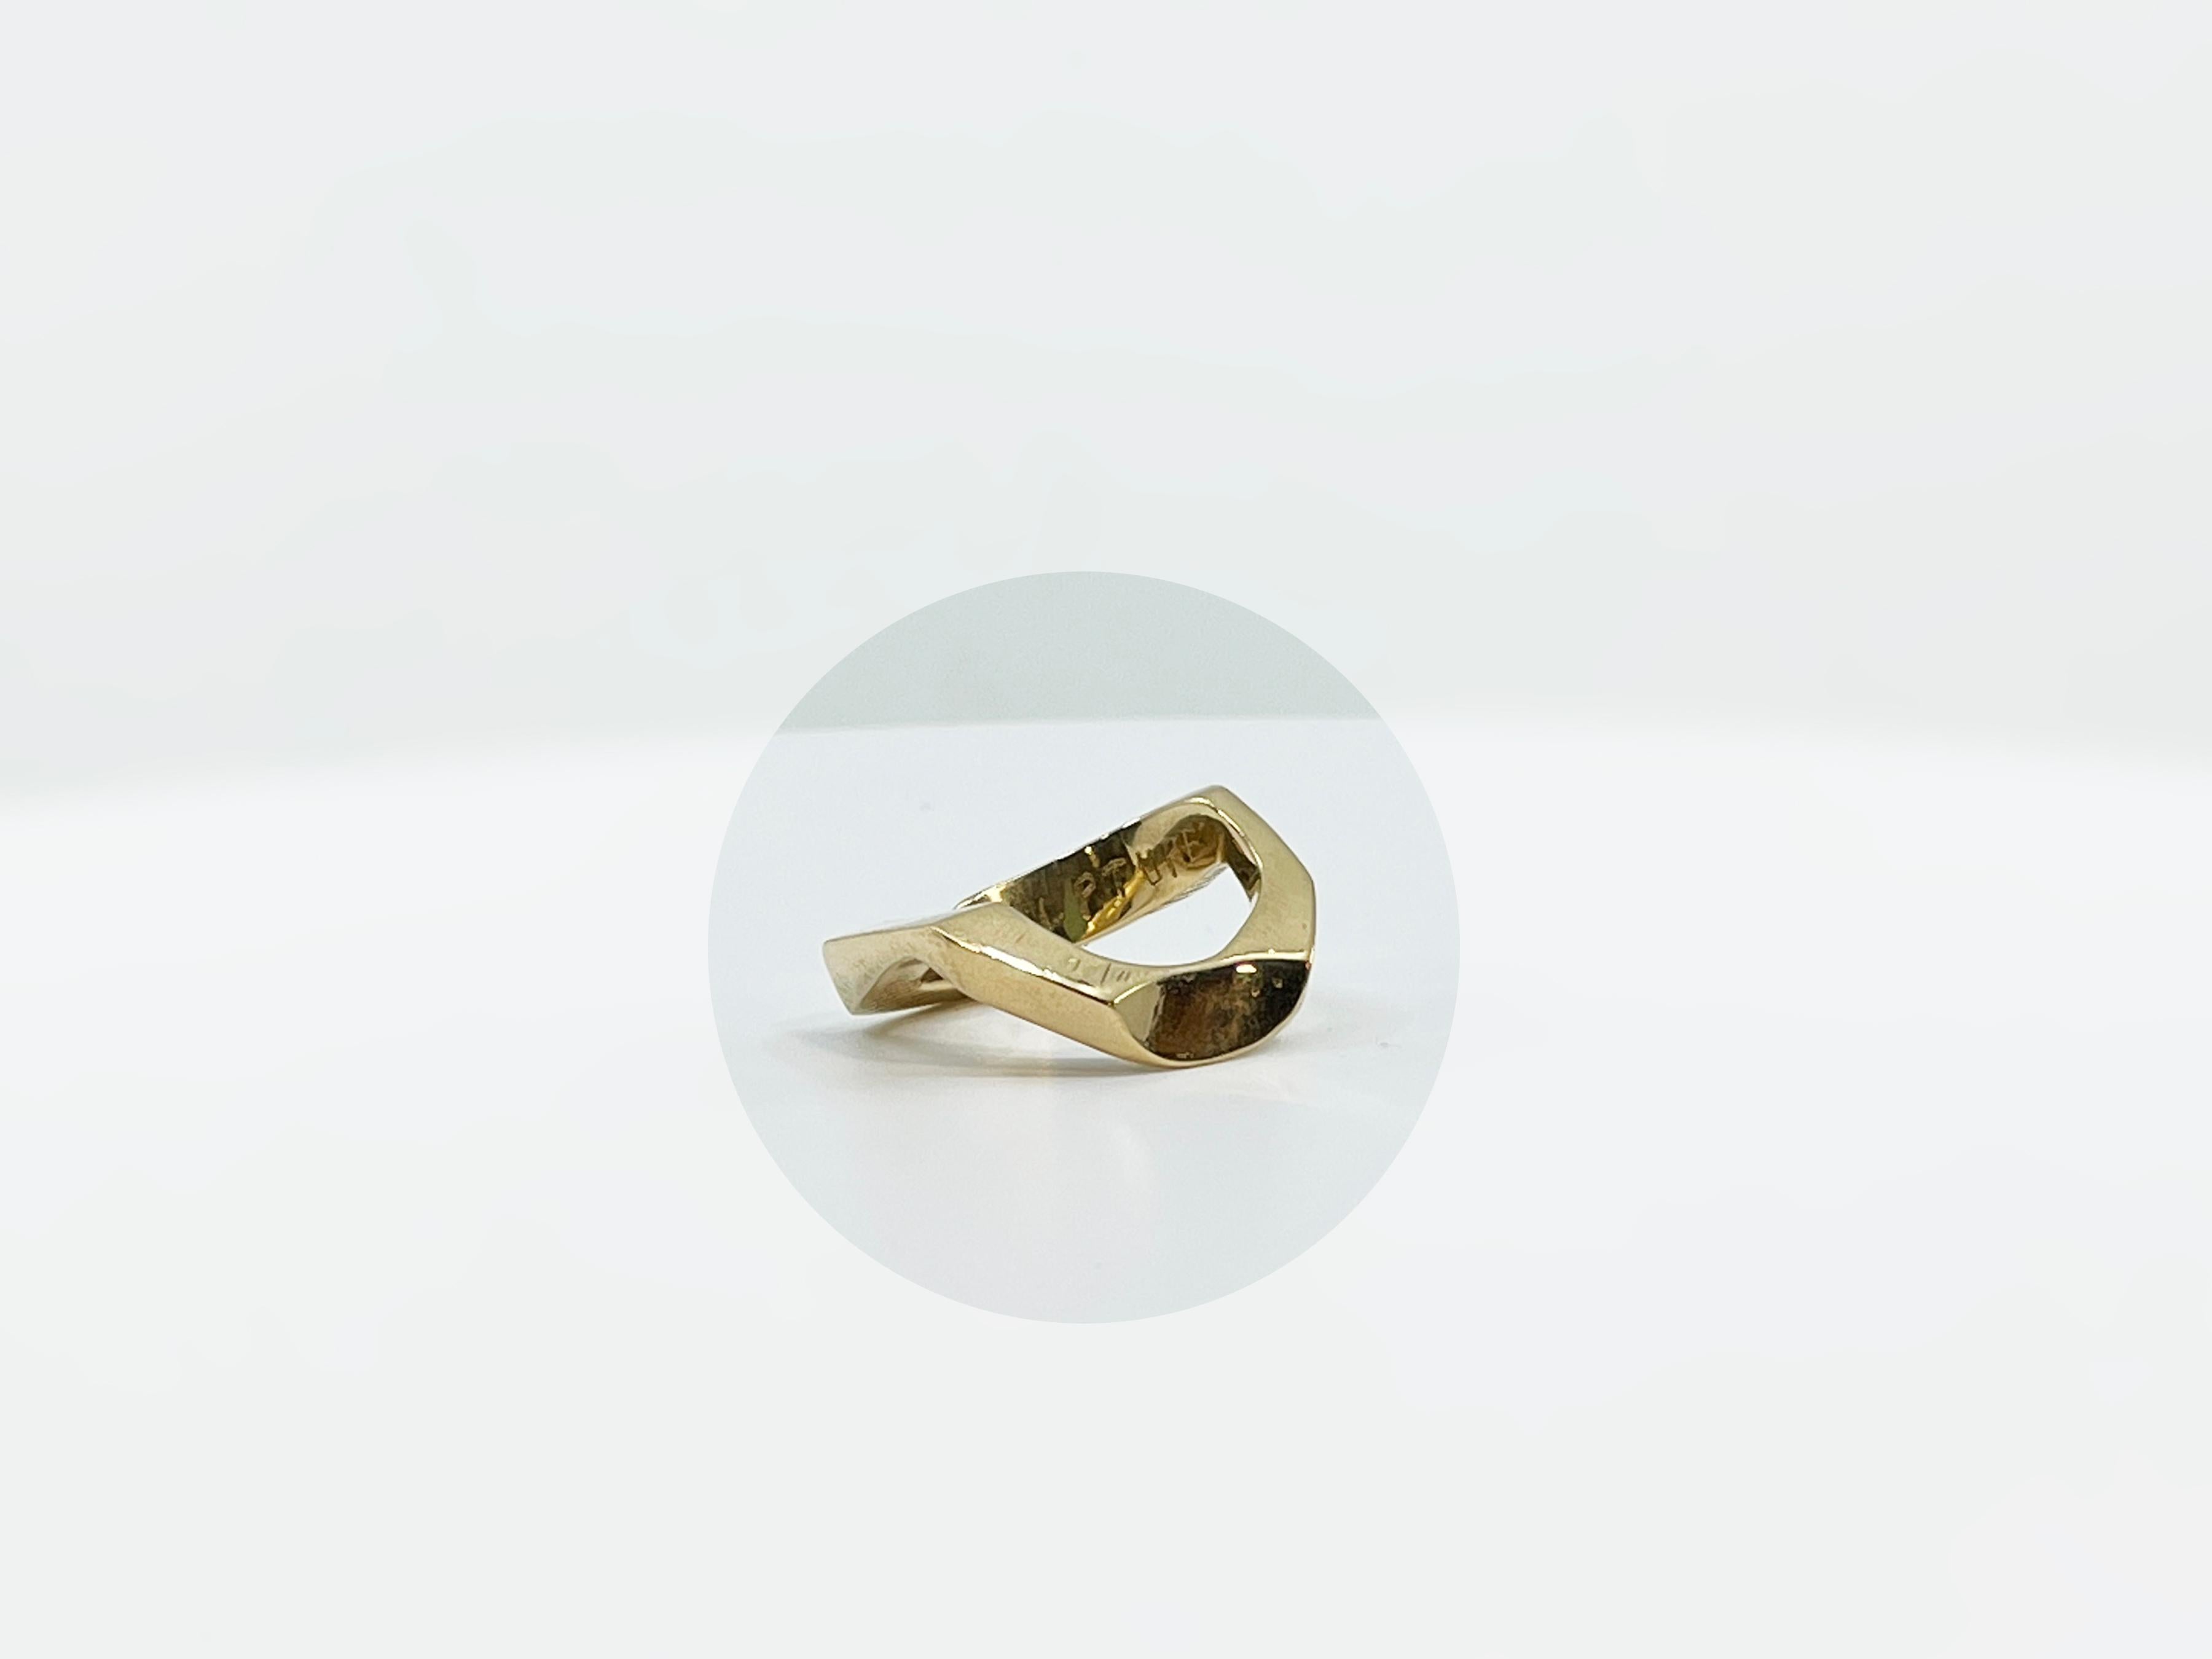 This ring is one of the Sculptural / Architectural jewellery created by Argentinian/Canadian artist Dina González Mascaró. This ring is part of the explorations that the artist did , calling the series: 